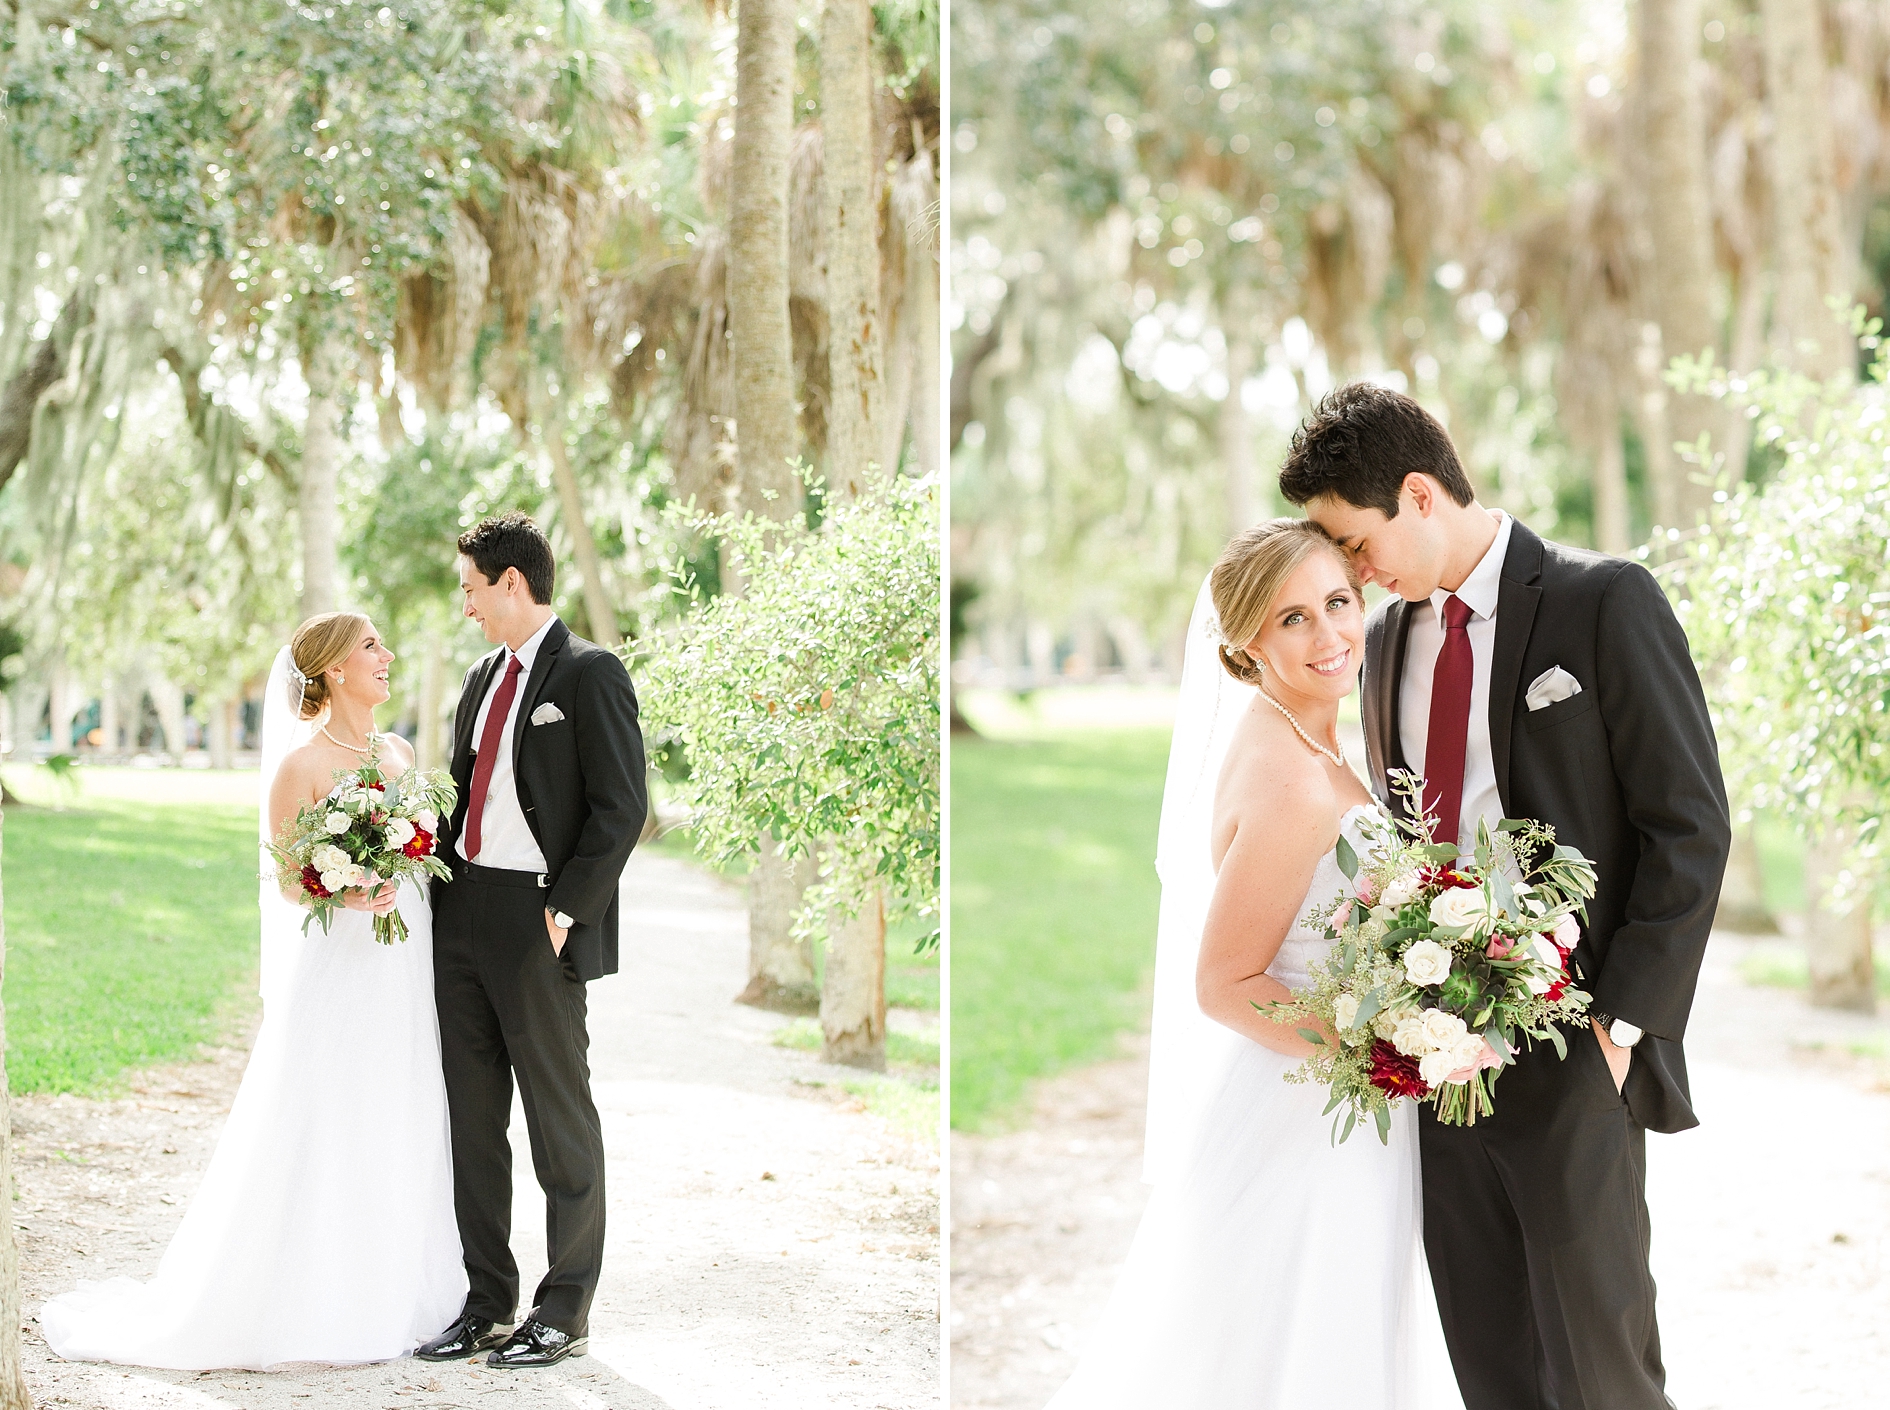 Edson Keith Mansion Wedding | © Ailyn La Torre Photography 2015